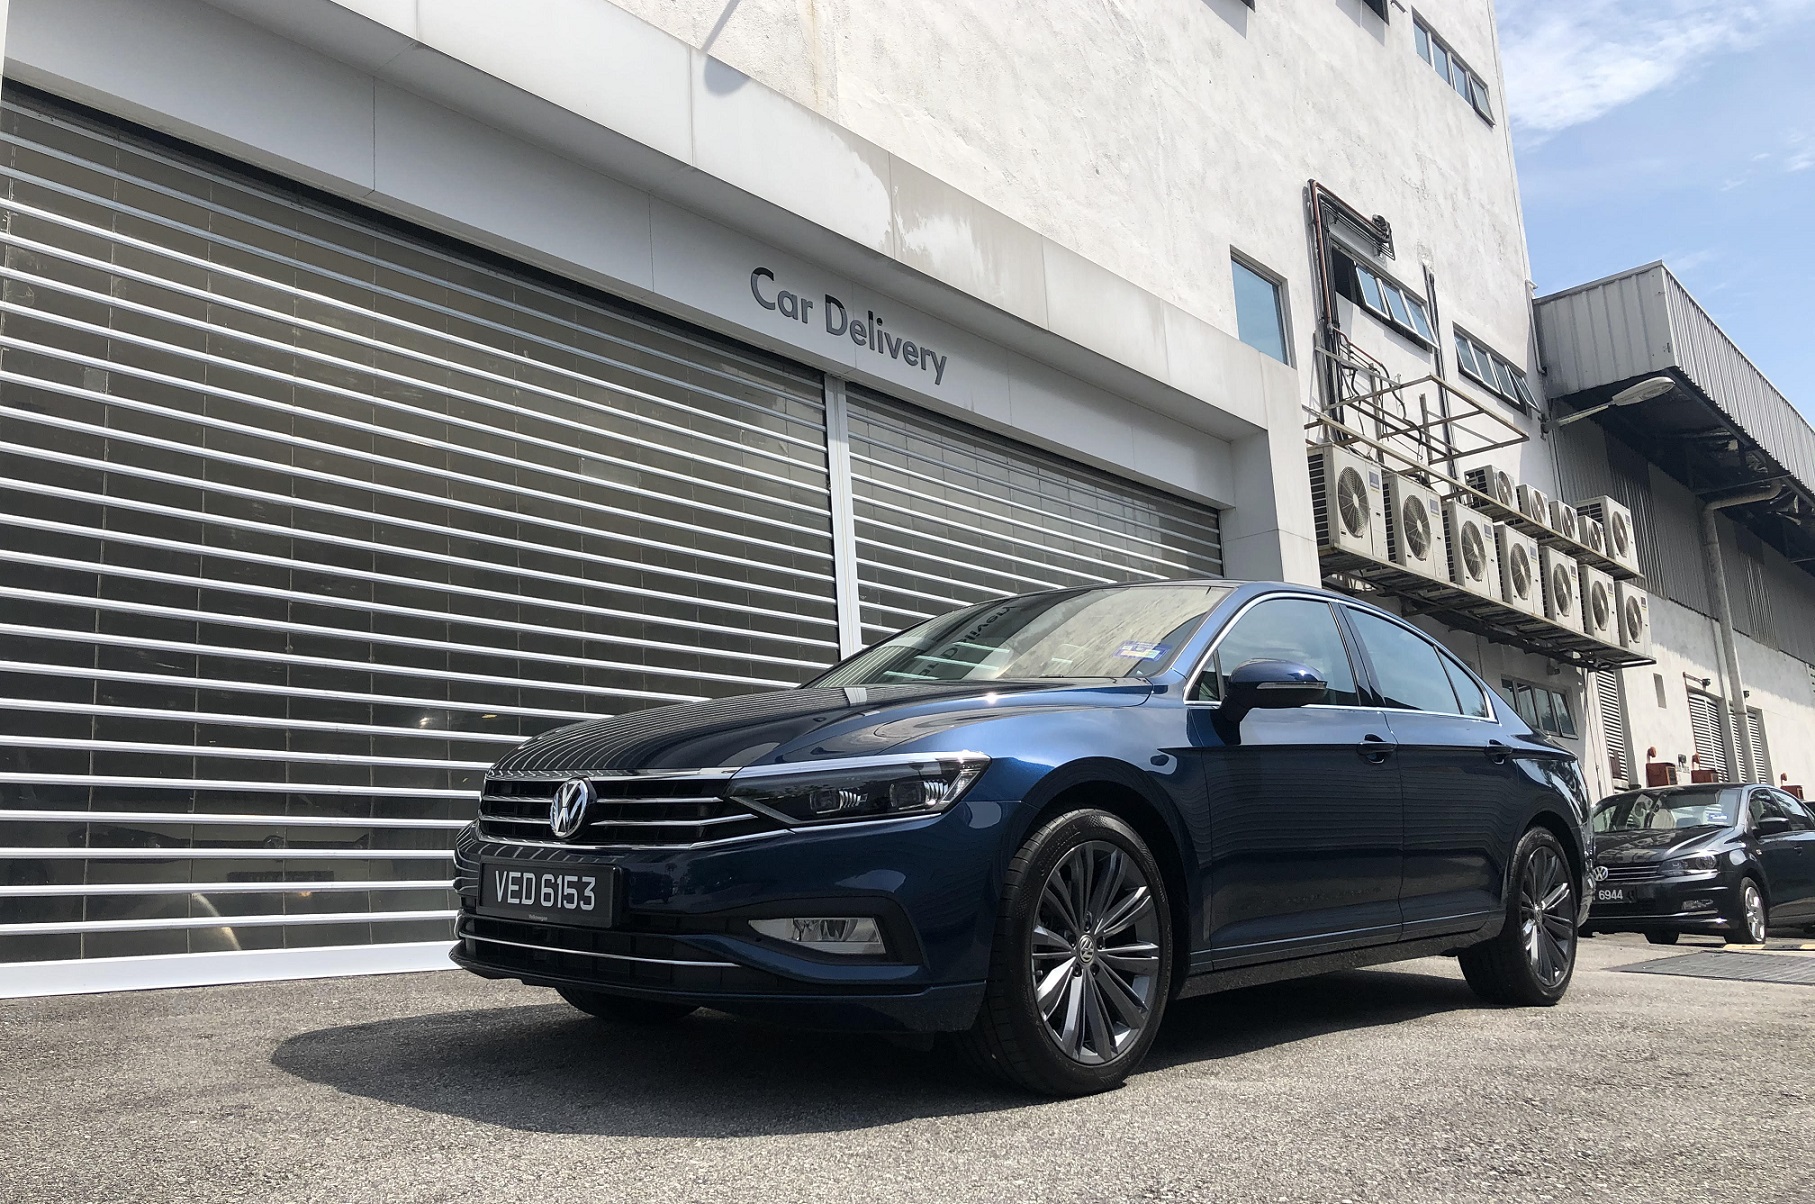 Volkswagen Malaysia reveals tax-exempted prices for the rest of 2020